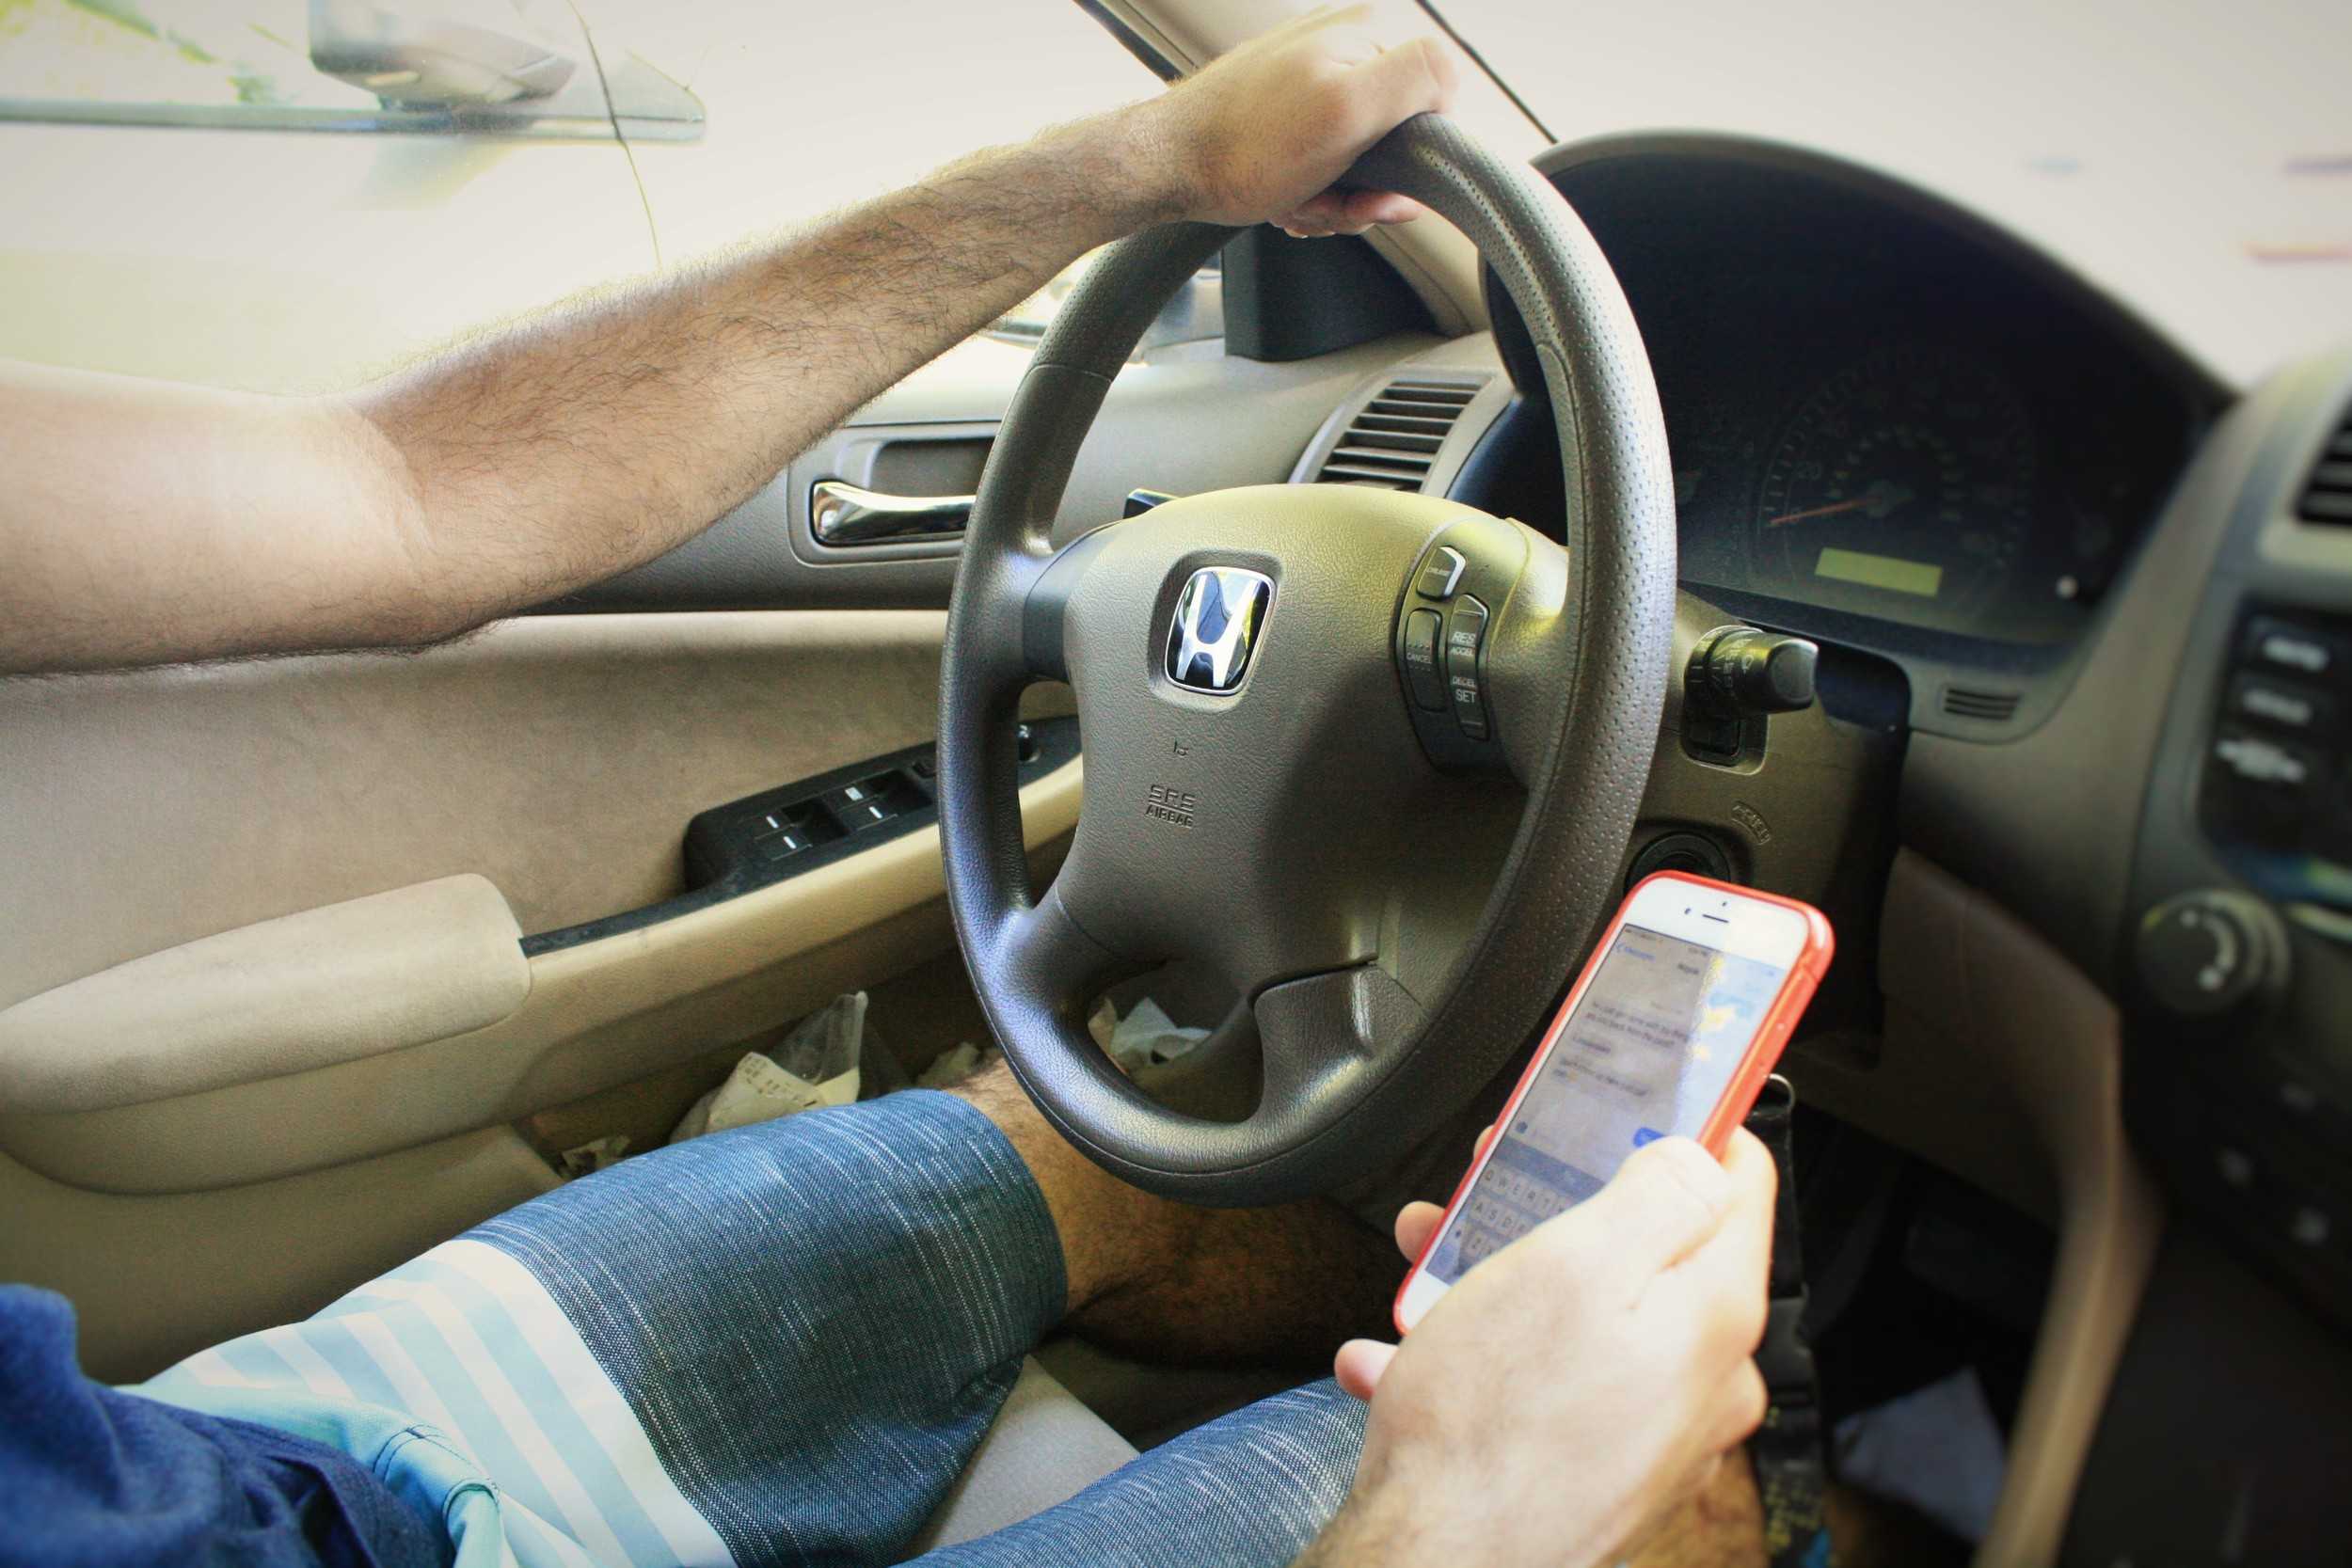 STAR // Niquie WilsonTexting while driving is a common occurence among college students and the most recent media campaign, #JustDrive discourages distracted driving.